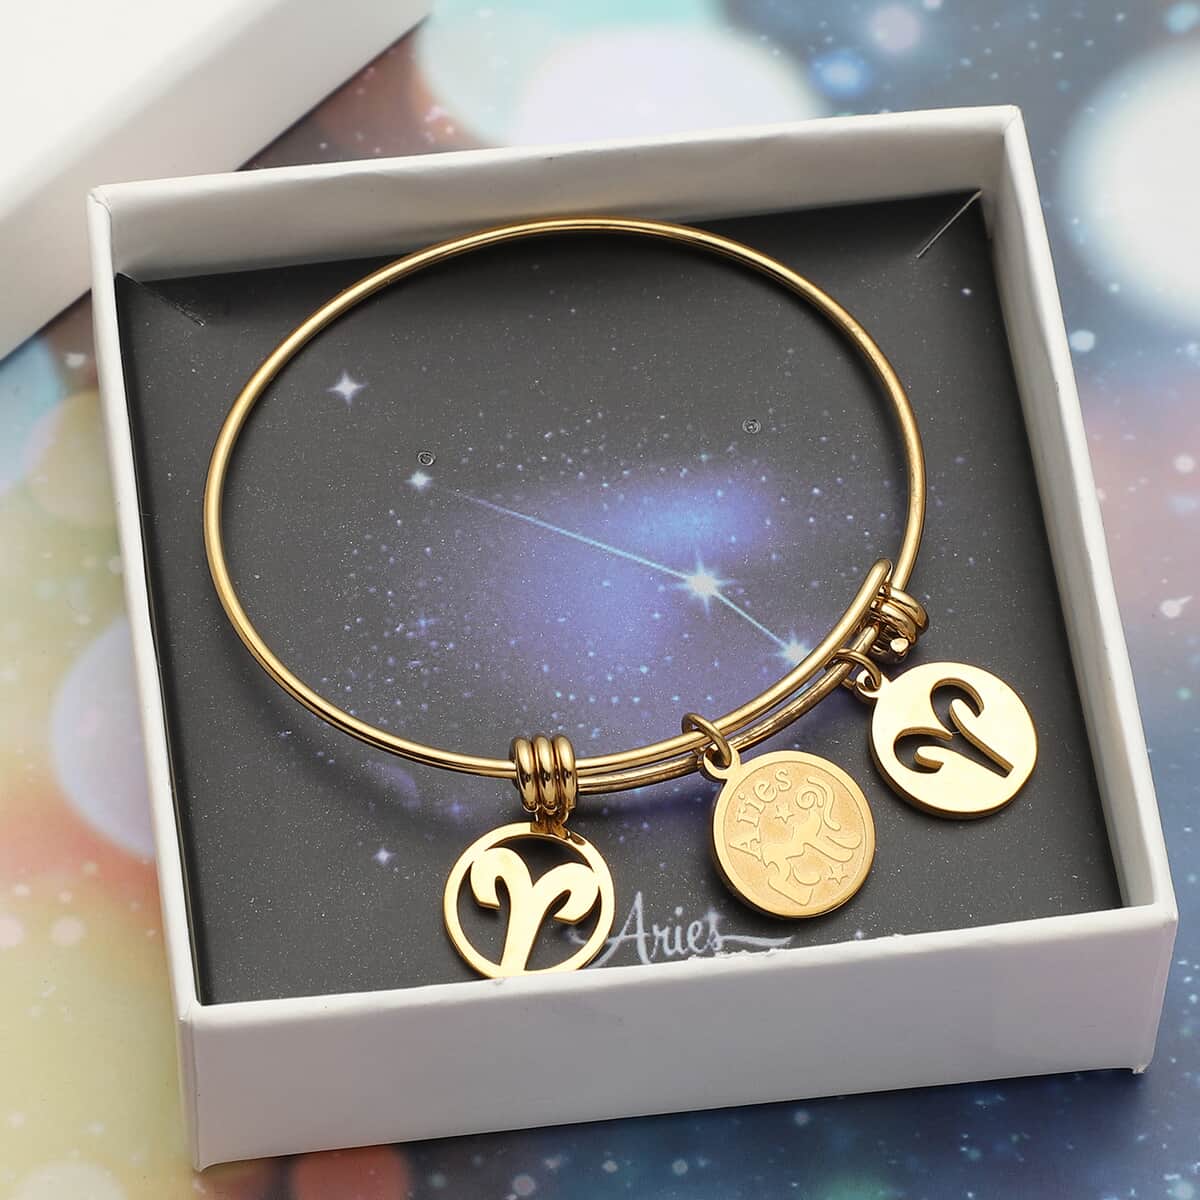 Aries Zodiac Bangle Bracelet Gift Set in ION Plated Yellow Gold Stainless Steel (6-9 in) image number 0